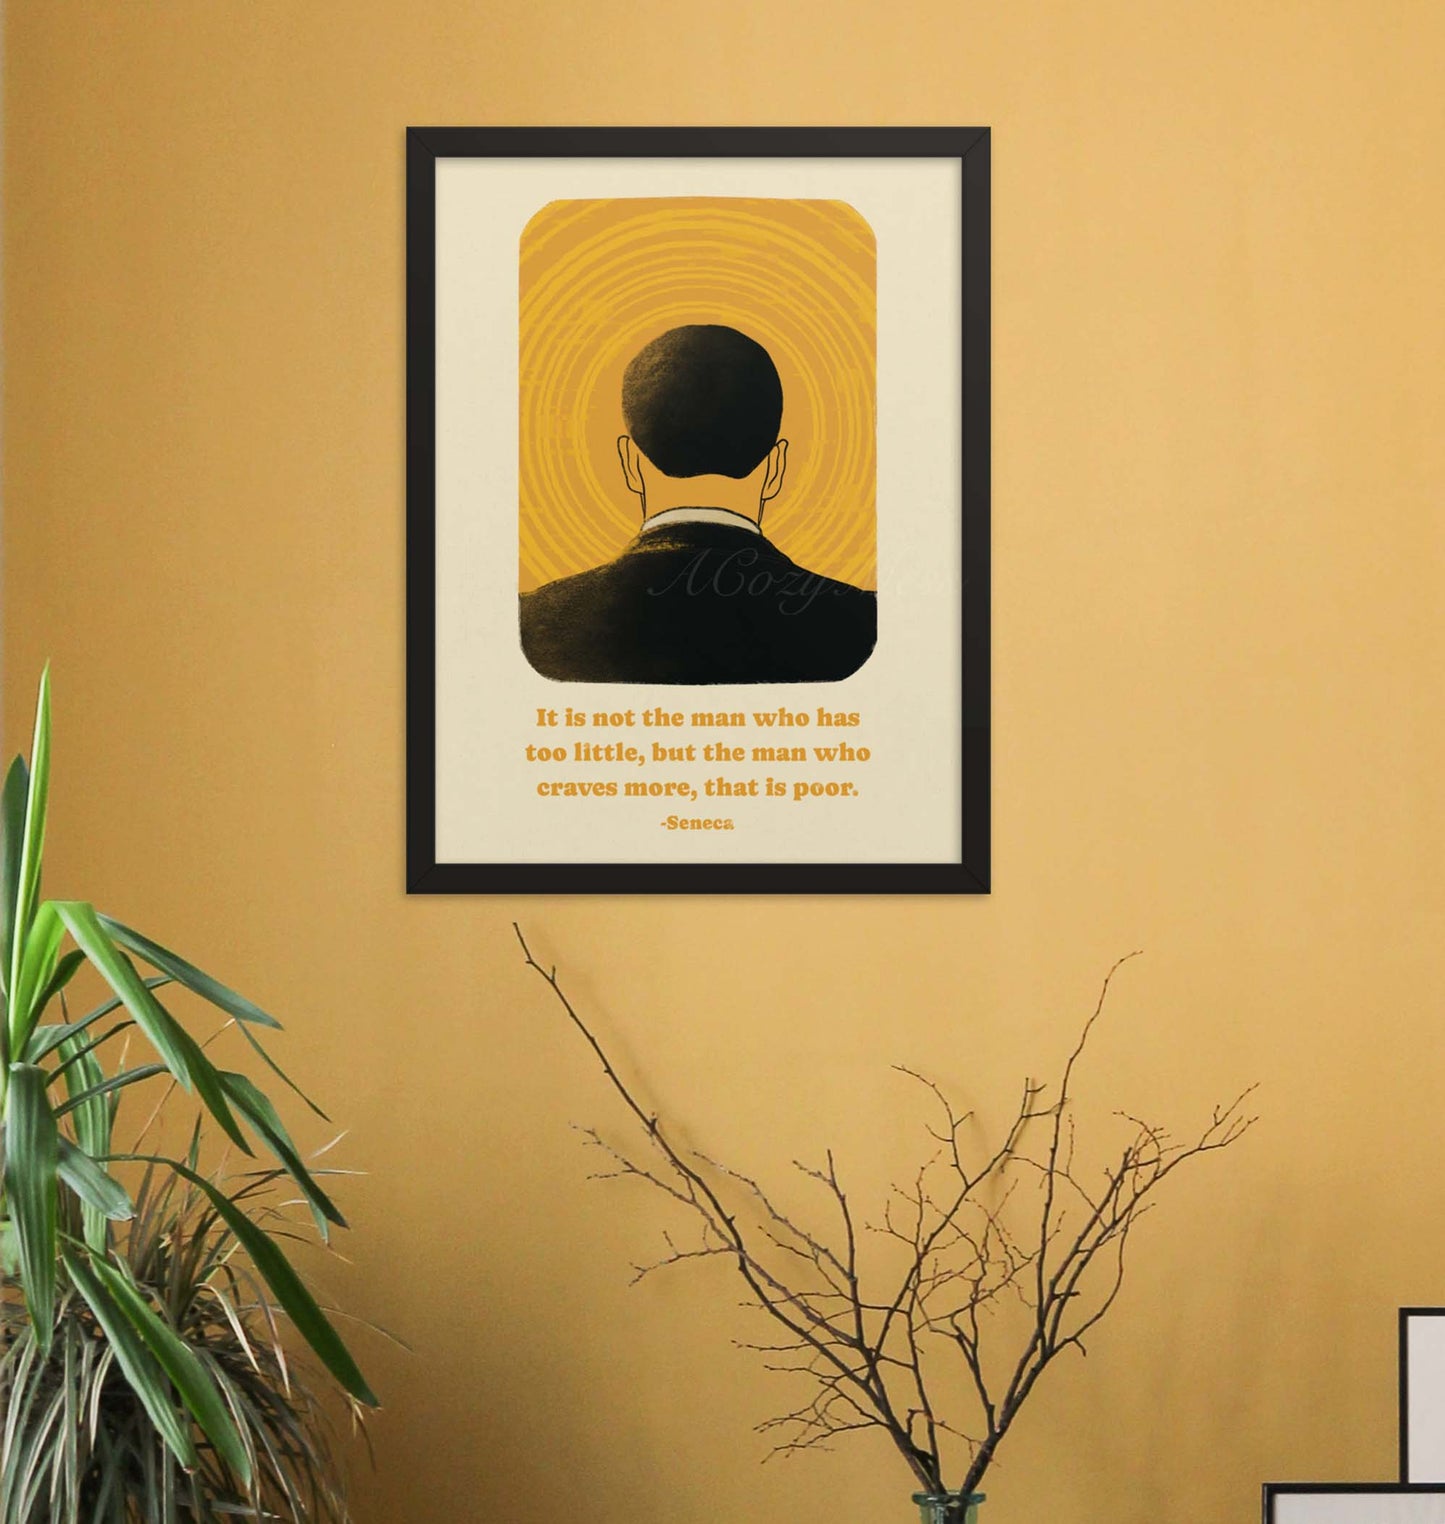 Art poster depicting the back of a man's head against a vibrant yellow background with concentric circles emanating from the center, resembling a halo or sun. Below the image is a quote by Seneca in elegant, readable font that reads, "It is not the man who has too little, but the man who craves more, that is poor." Available in black frame.